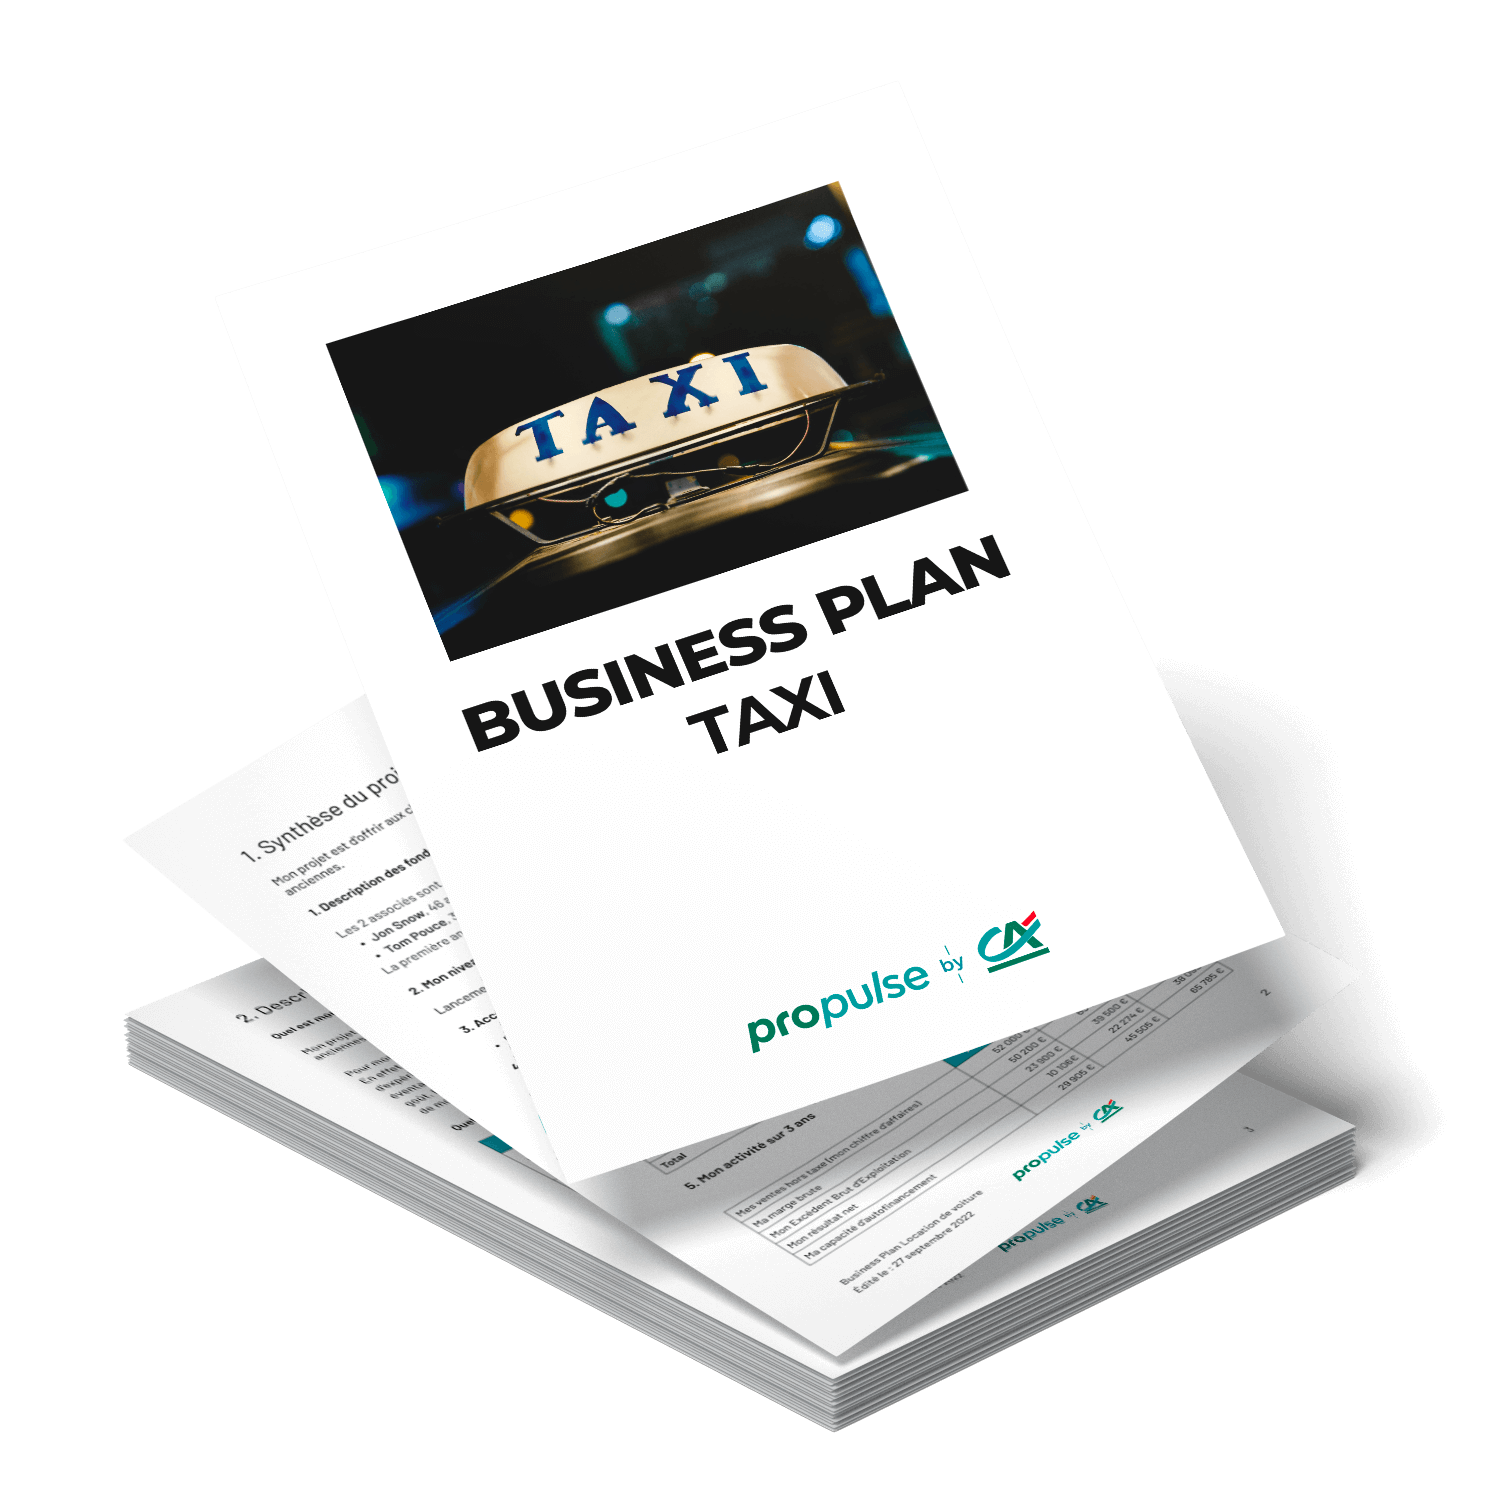 business plan taxi